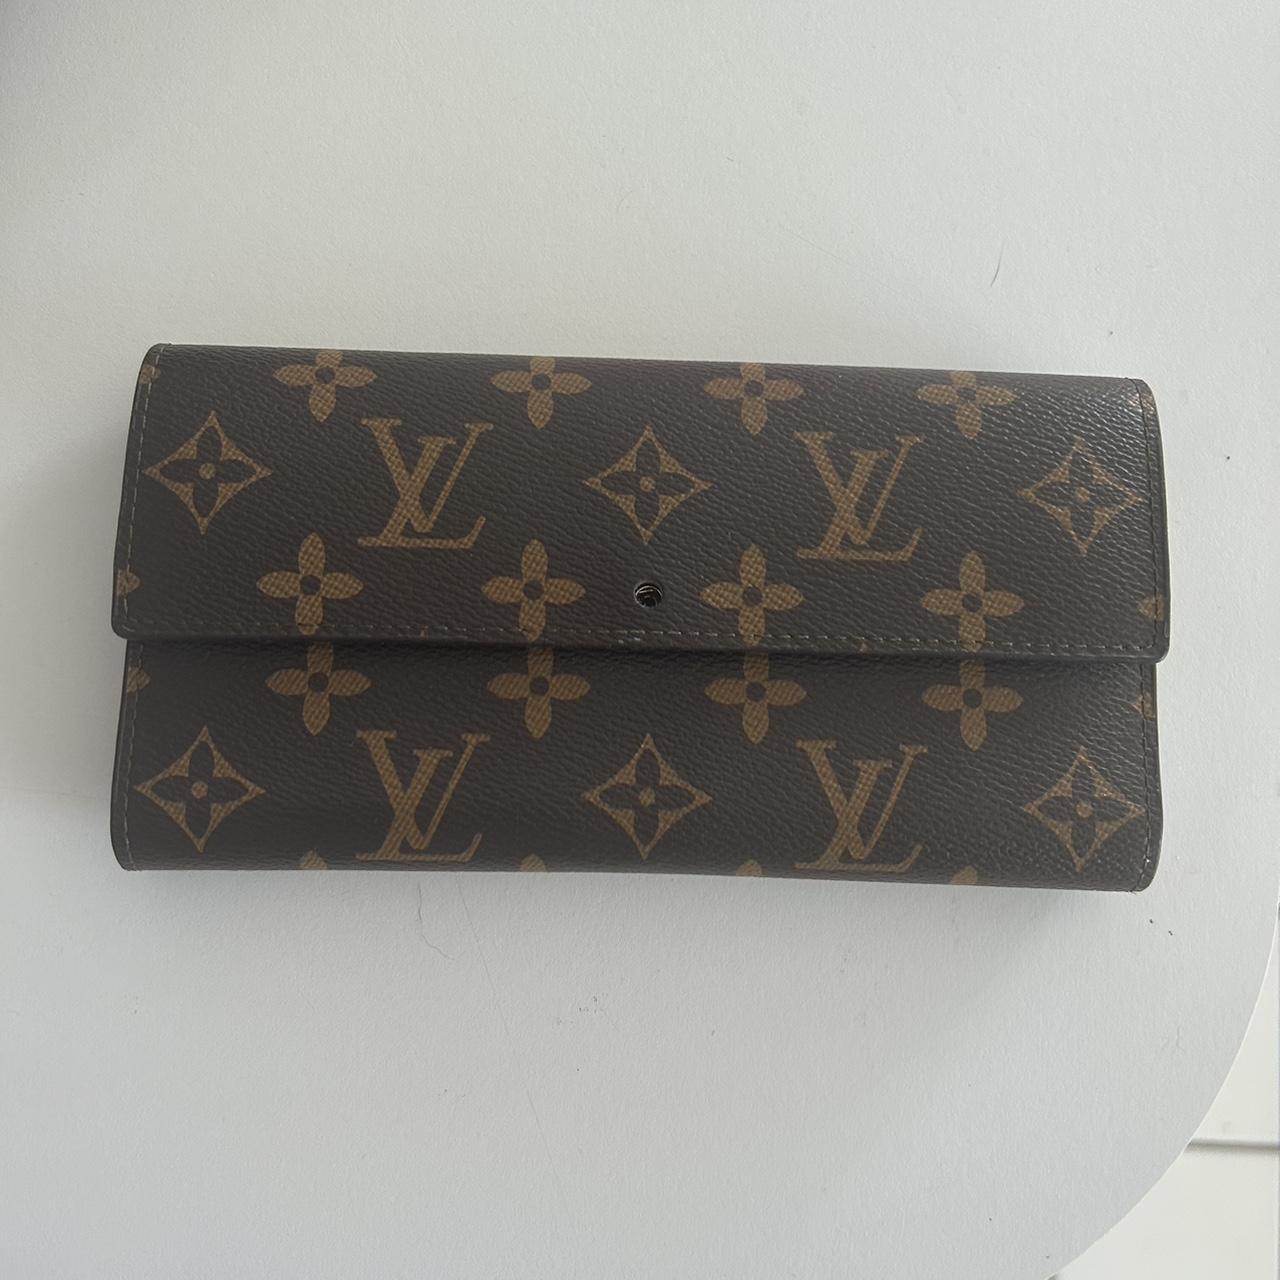 louis Vuitton wallet it stays closed but its missing - Depop